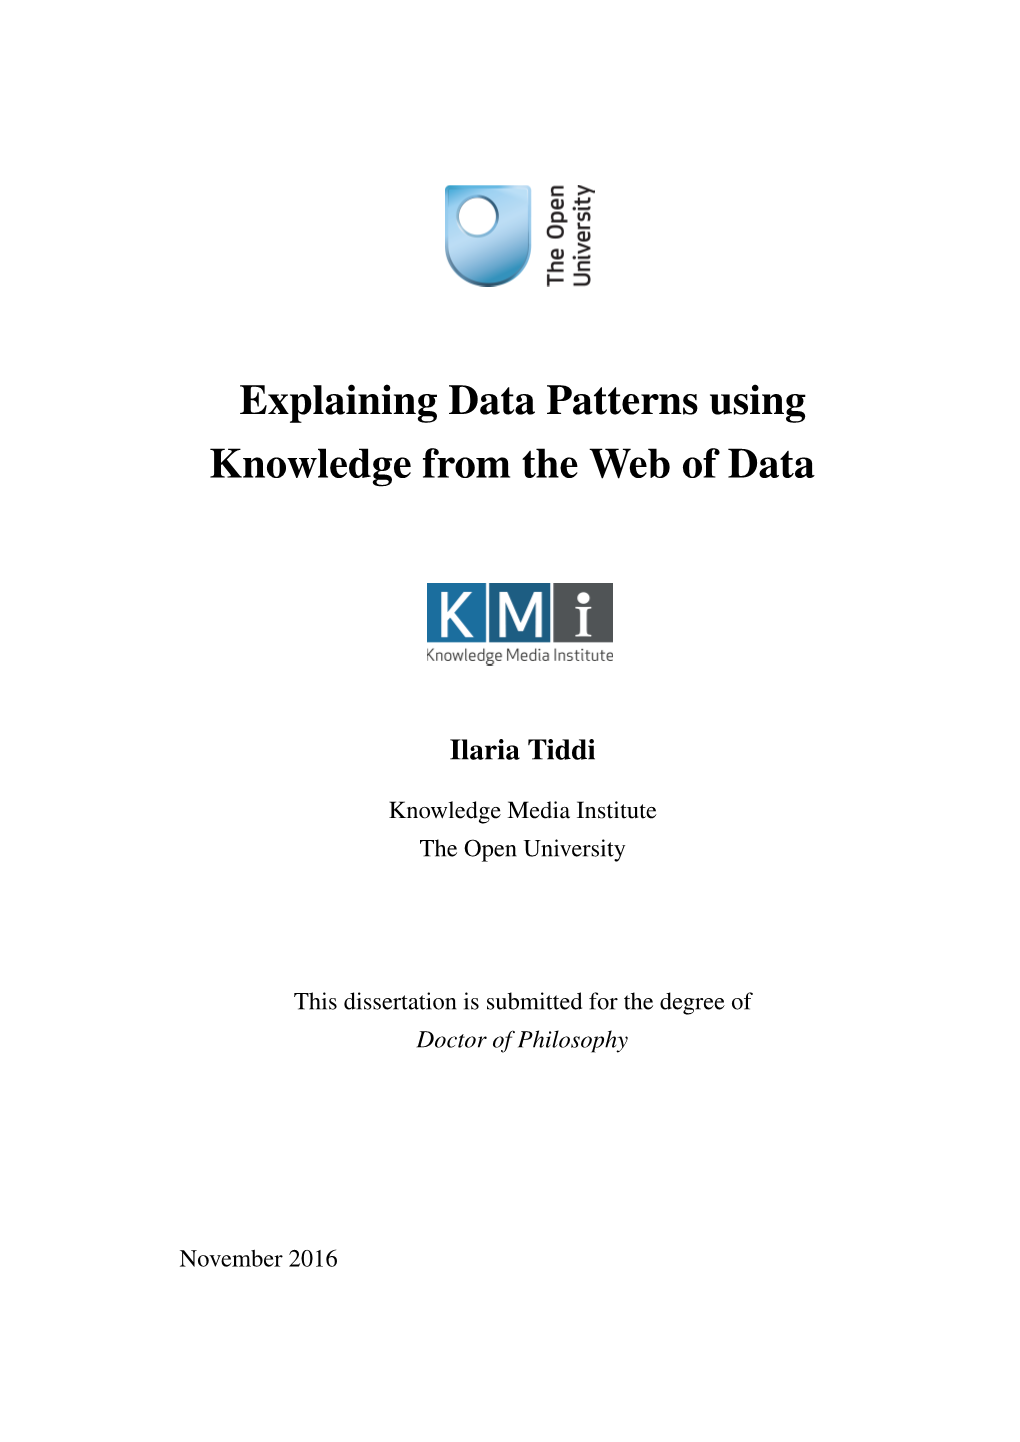 Explaining Data Patterns Using Knowledge from the Web of Data